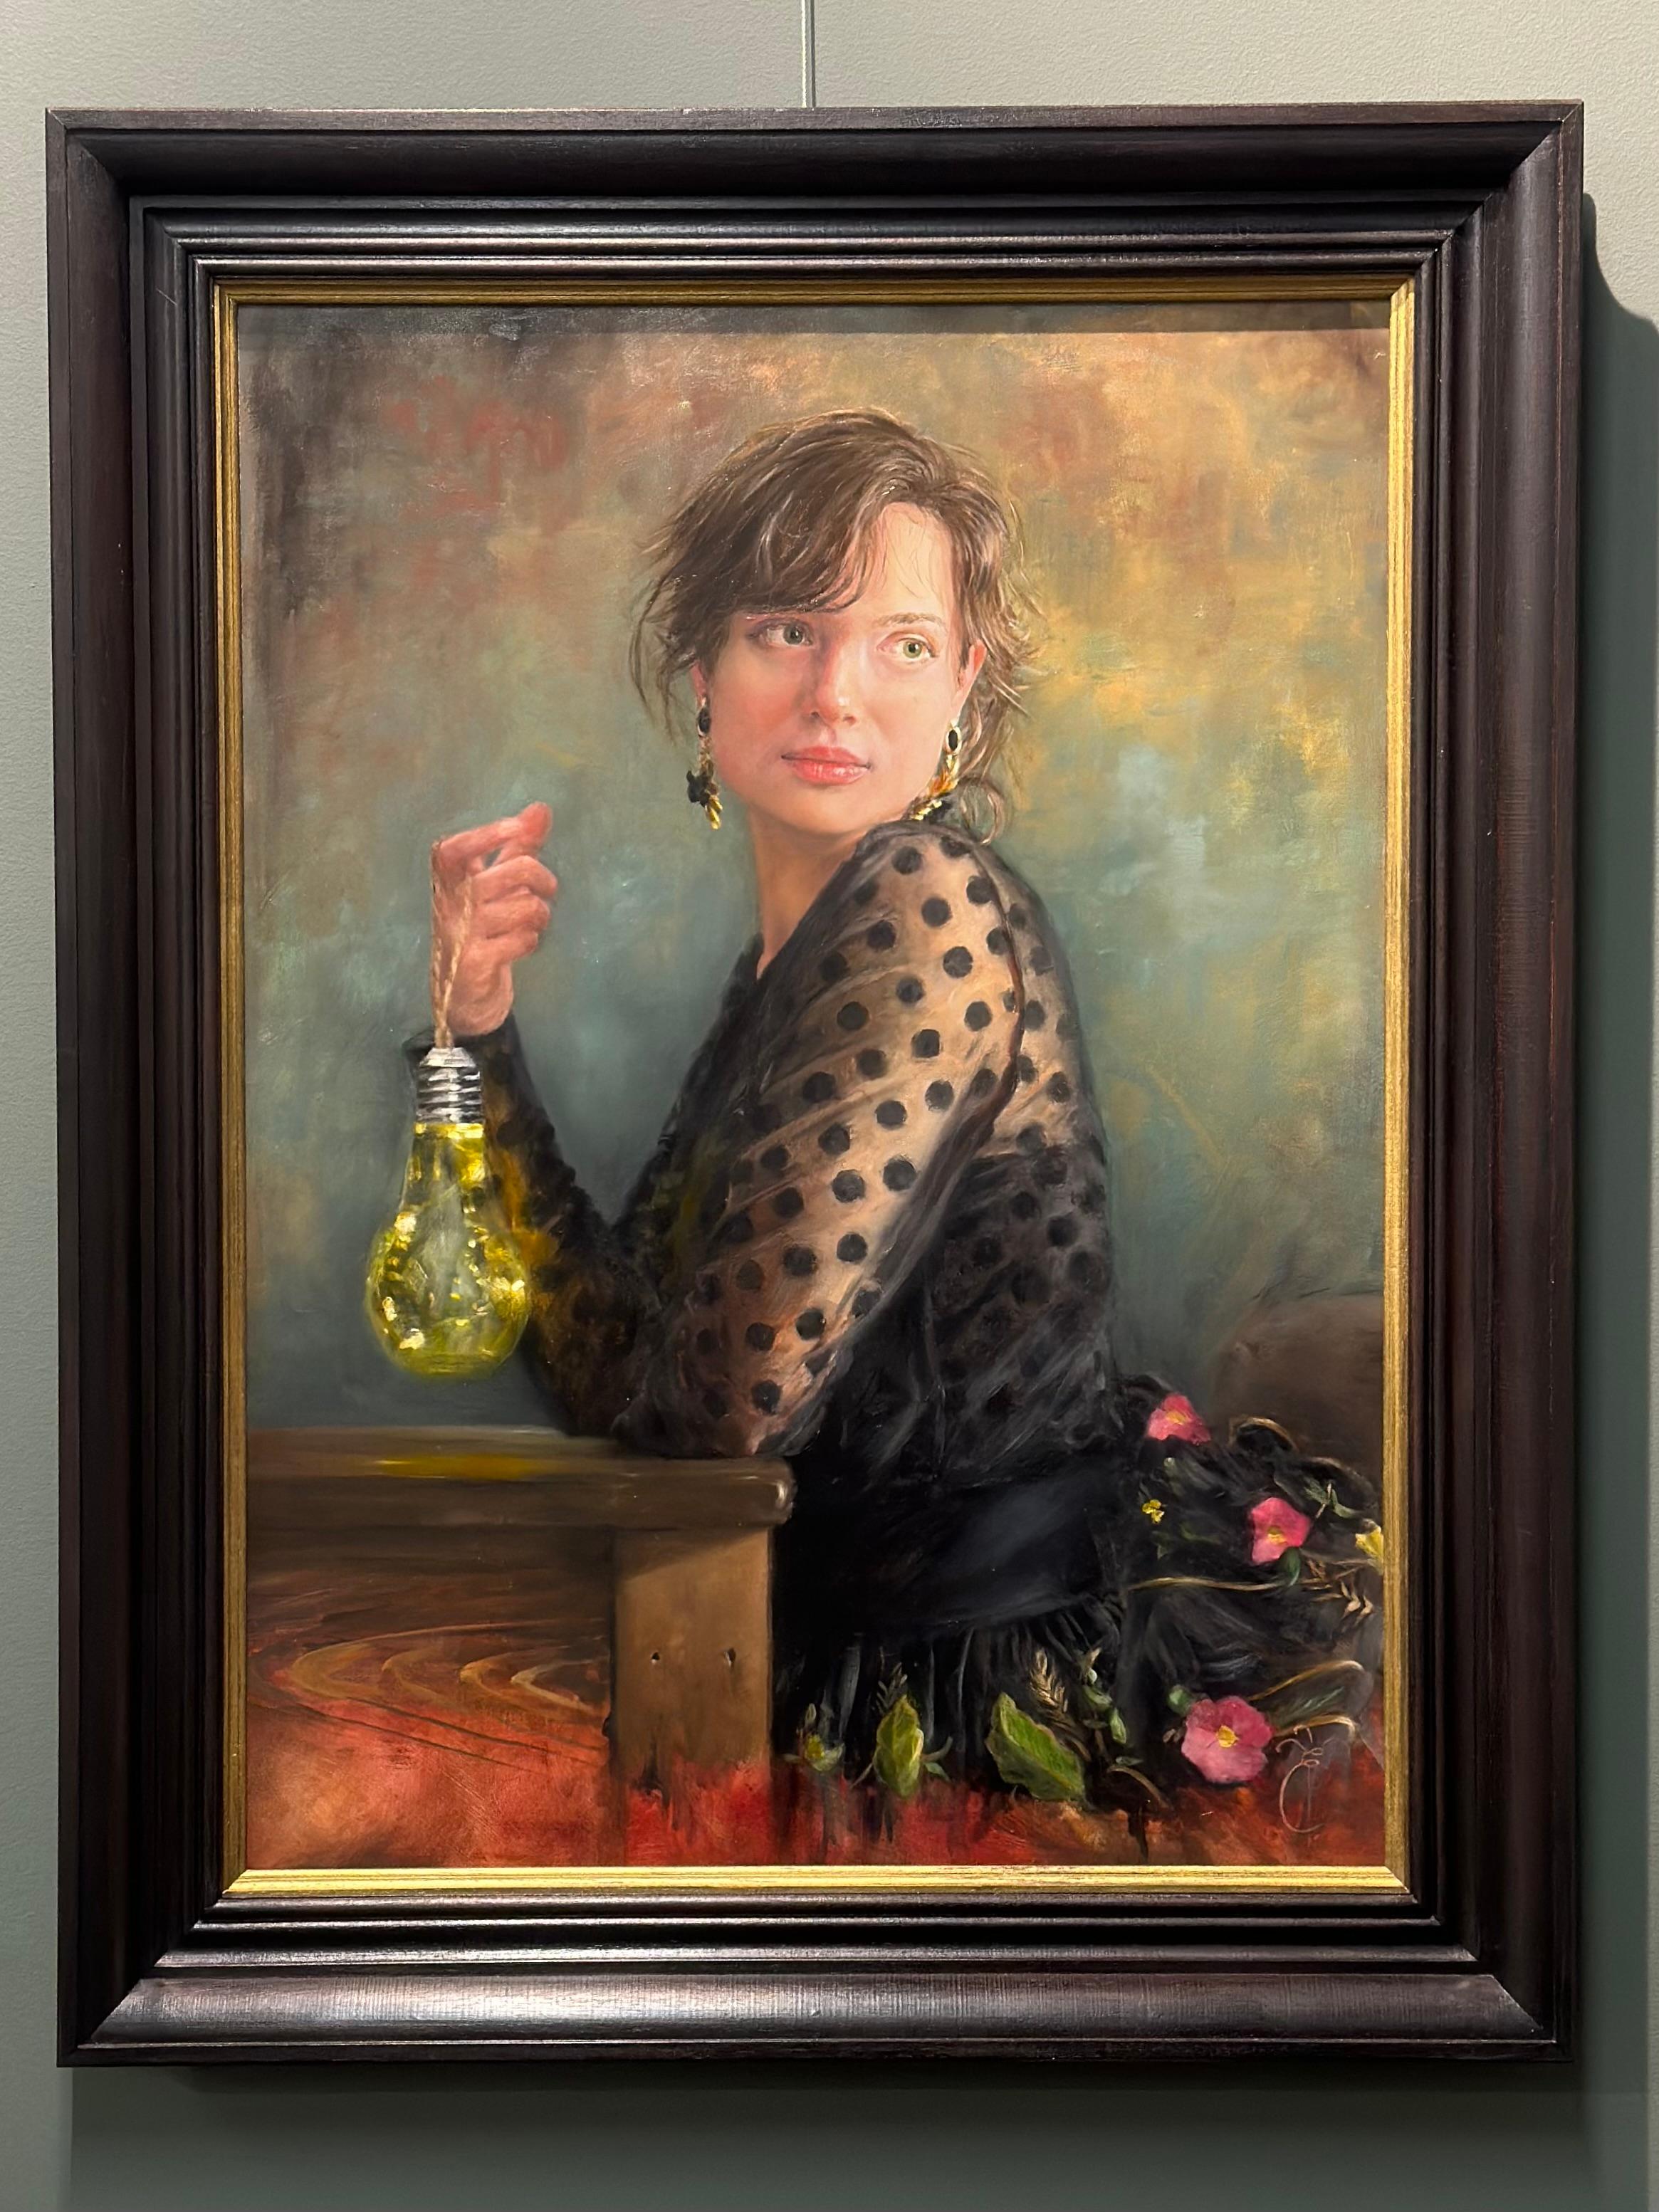 Dance me to the end of love- 21st Century Romantic painting- a girl with lantern - Painting by Liseth Visser